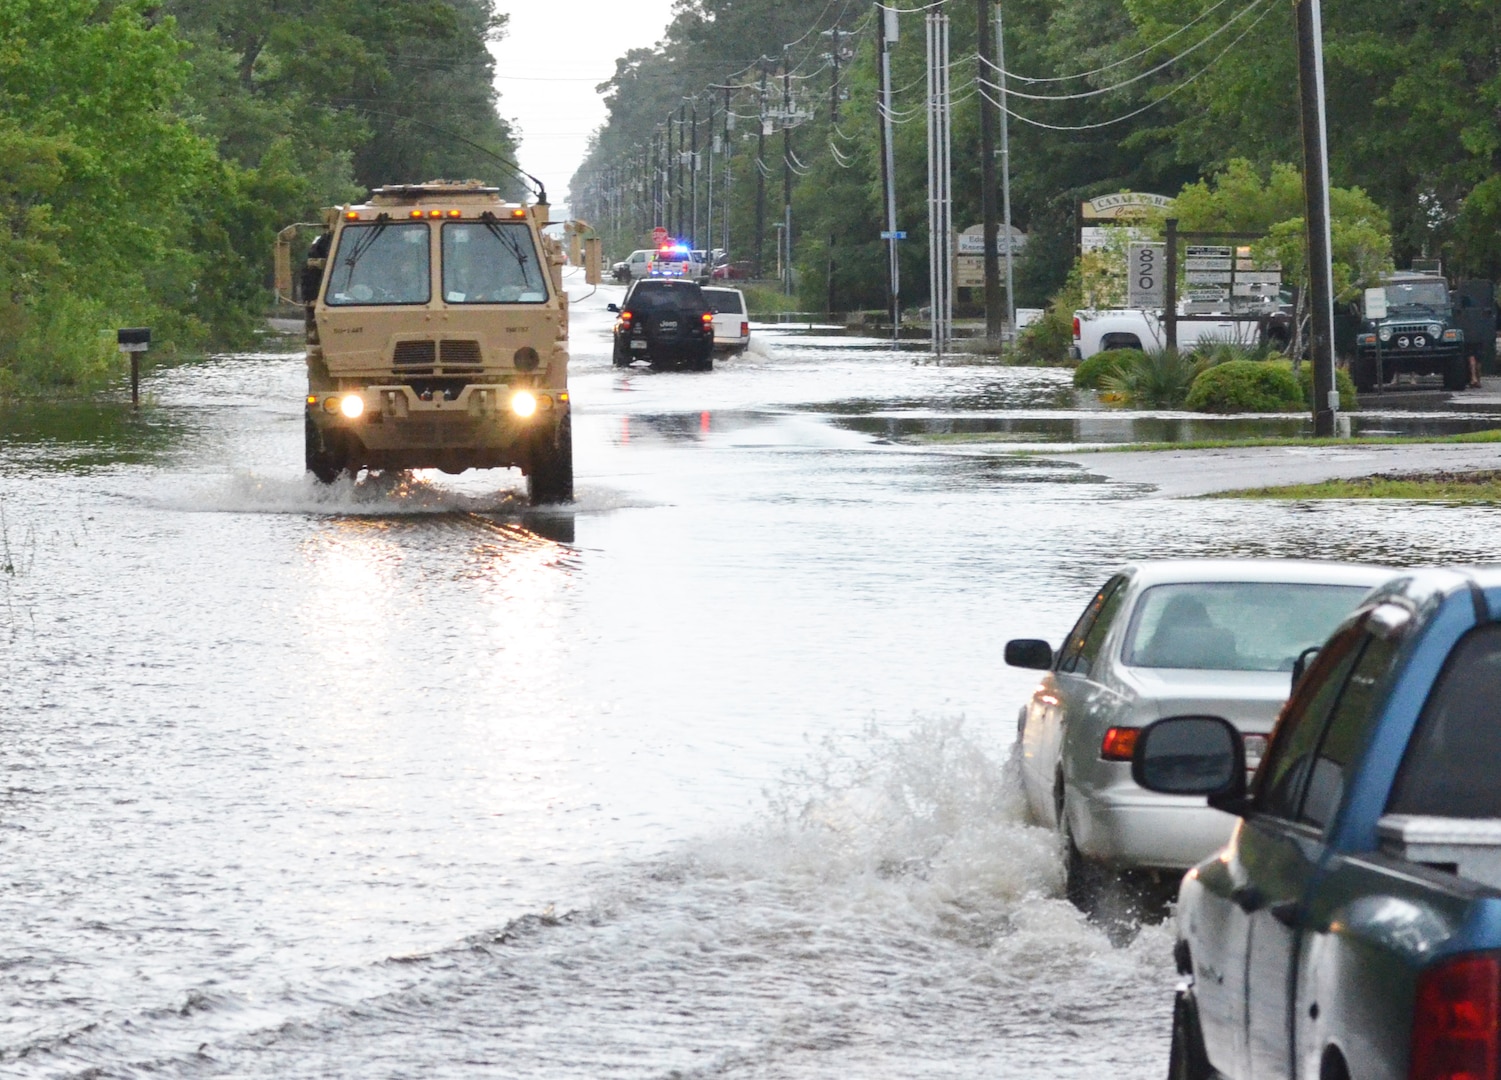 Soldiers in a high-water military vehicle from the Florida National Guard's 144th Transportation Company make their way through flooded roads near Santa Rosa Beach, Fla., April 30, 2014. More than 50 Florida Army National Guard Soldiers responded with high-water military vehicles to assist civilian first responders during flooding in Florida's panhandle.